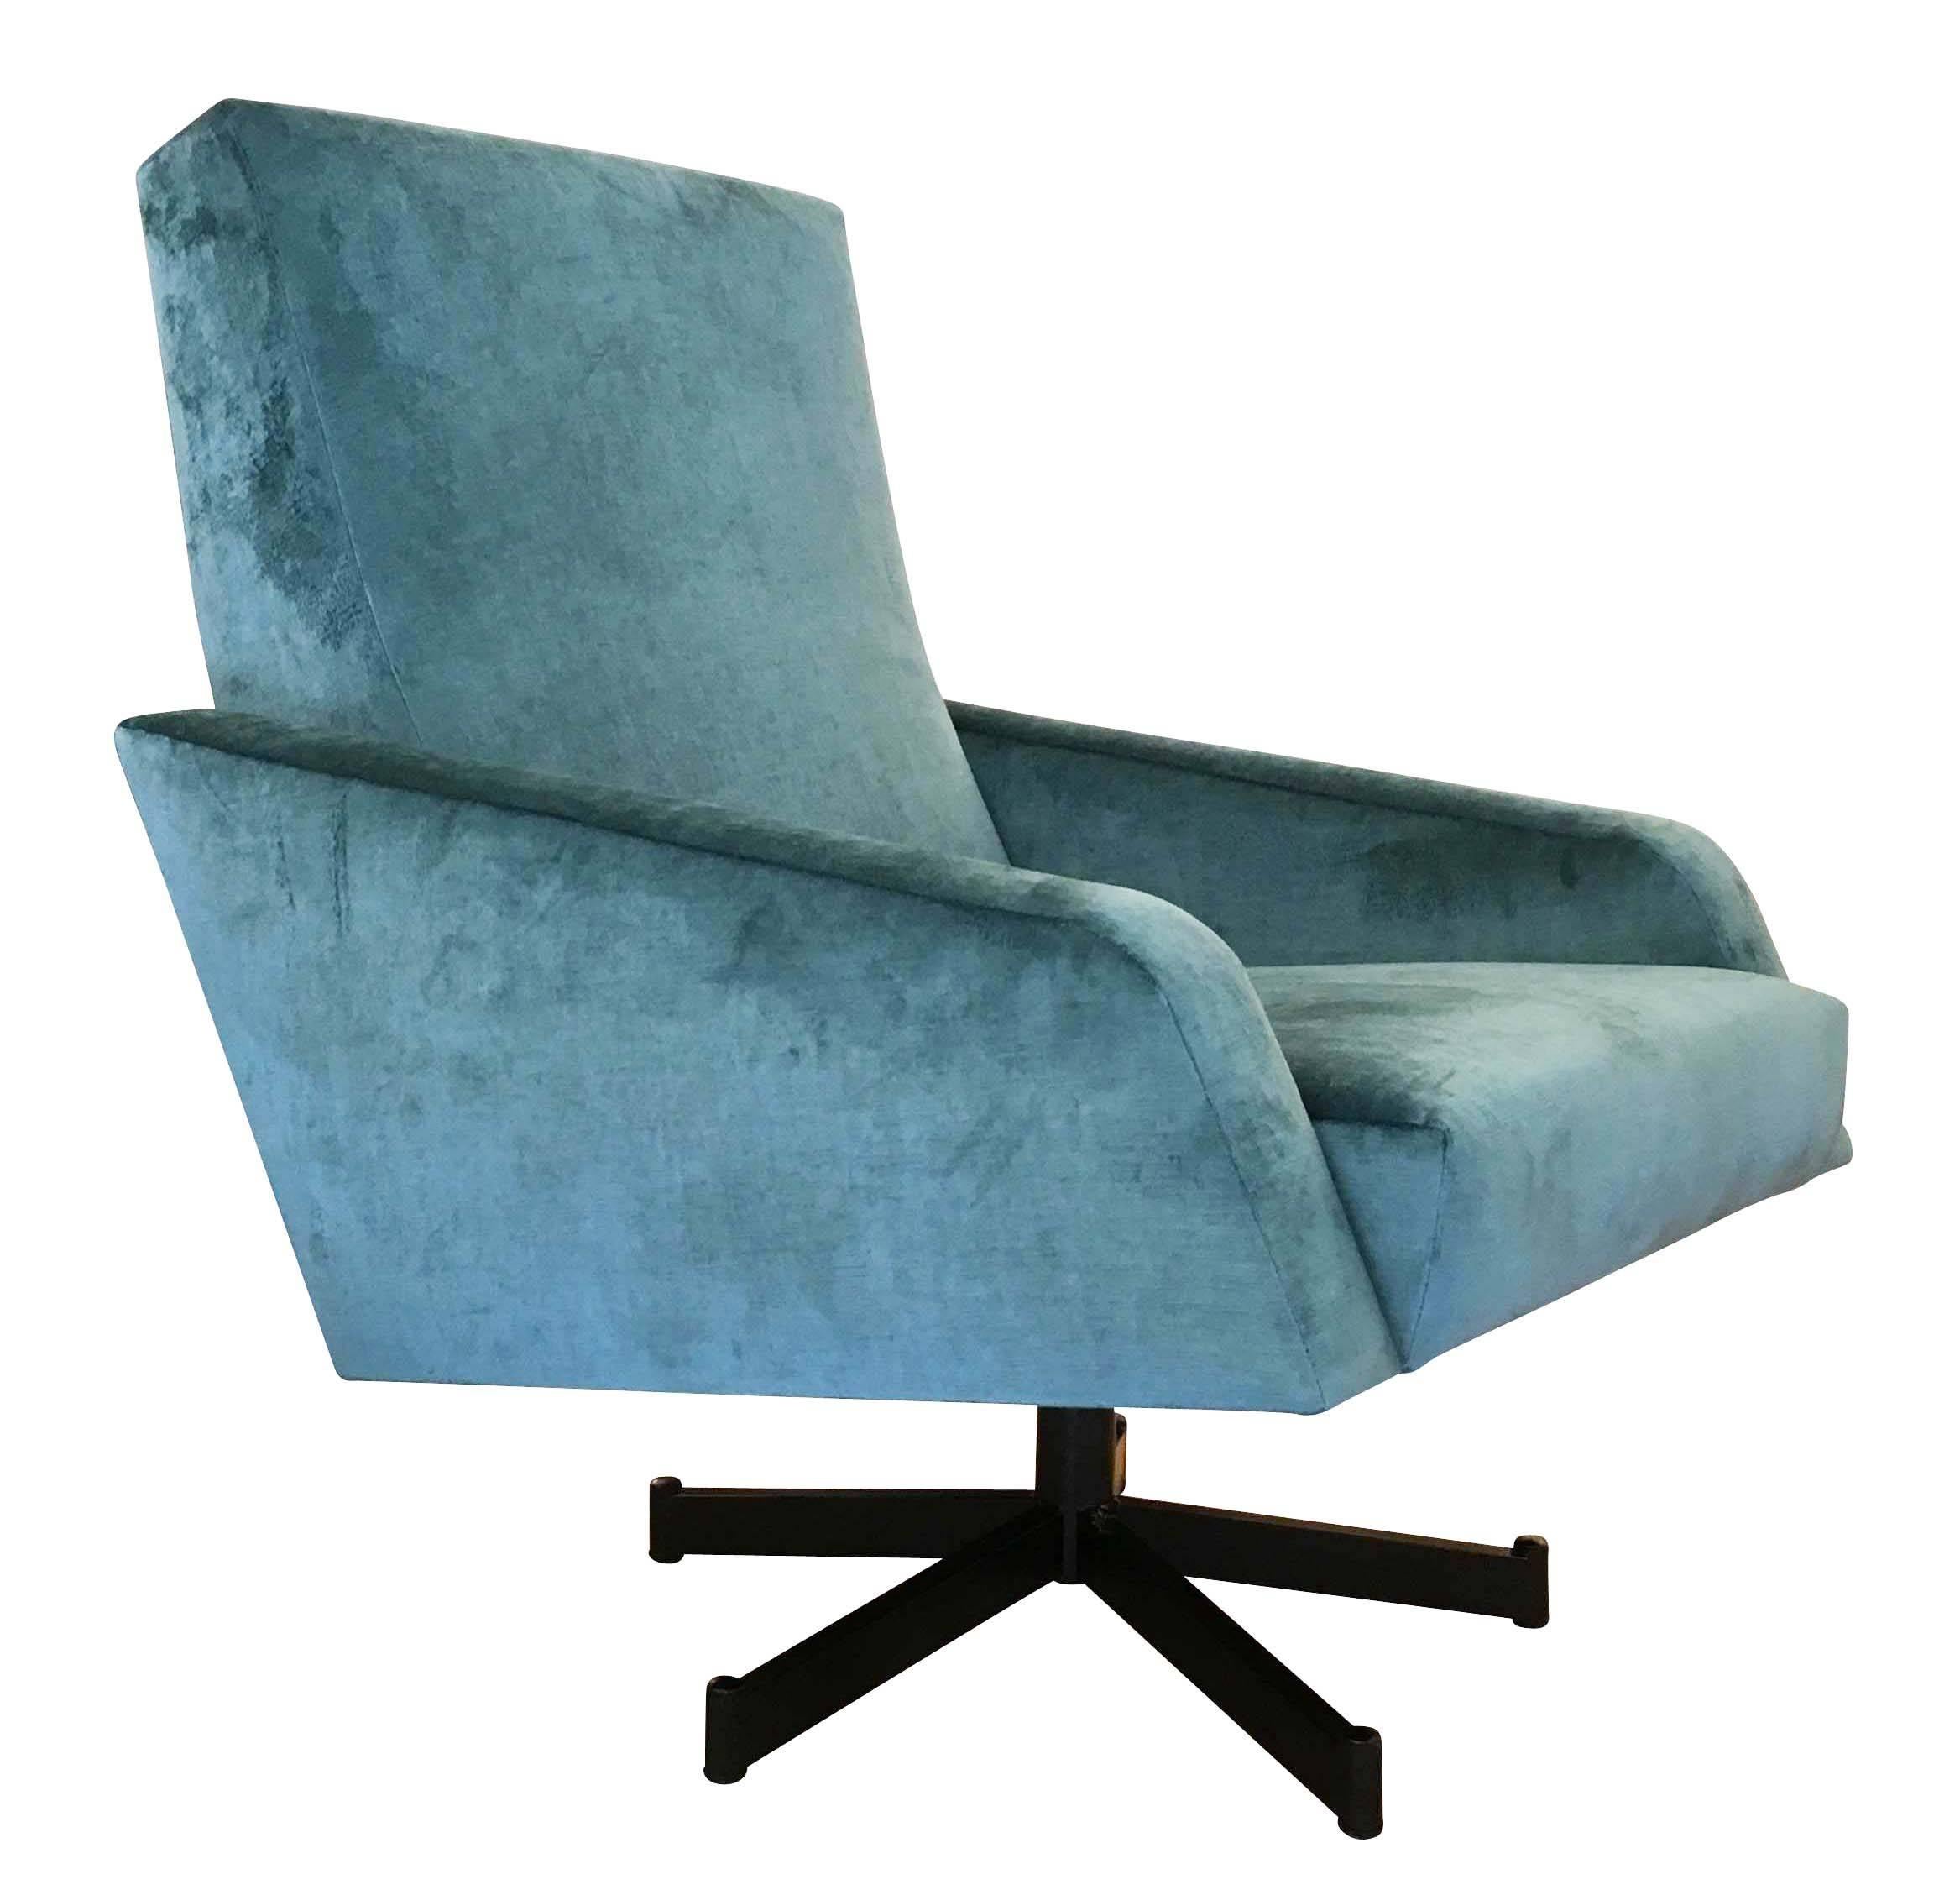 Elegant pair of swivel lounge chairs characterized by straight and diagonal lines. Very comfortable, the seat is on a black swivel base that turns 360 degrees. A great example of Mid-Century Italian design. One armchairs has been newly upholstered